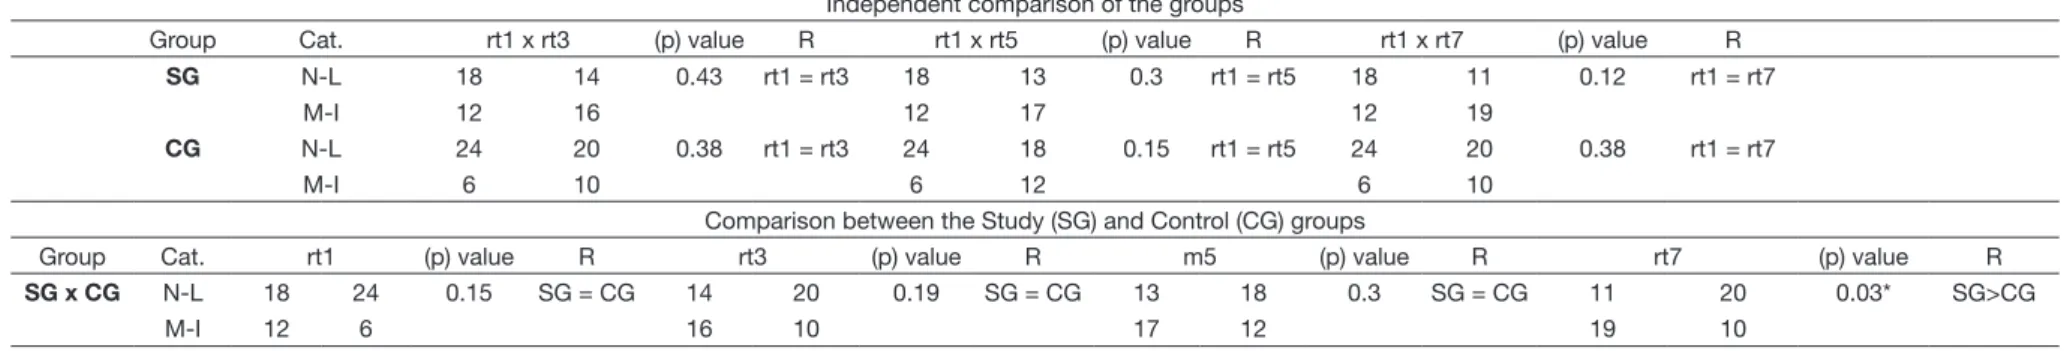 Table 4. Results of the auditory-perceptual assessment of voice for the independent comparison of the groups and for the comparison between the Study (SG) and Control (CG) groups Independent comparison of the groups